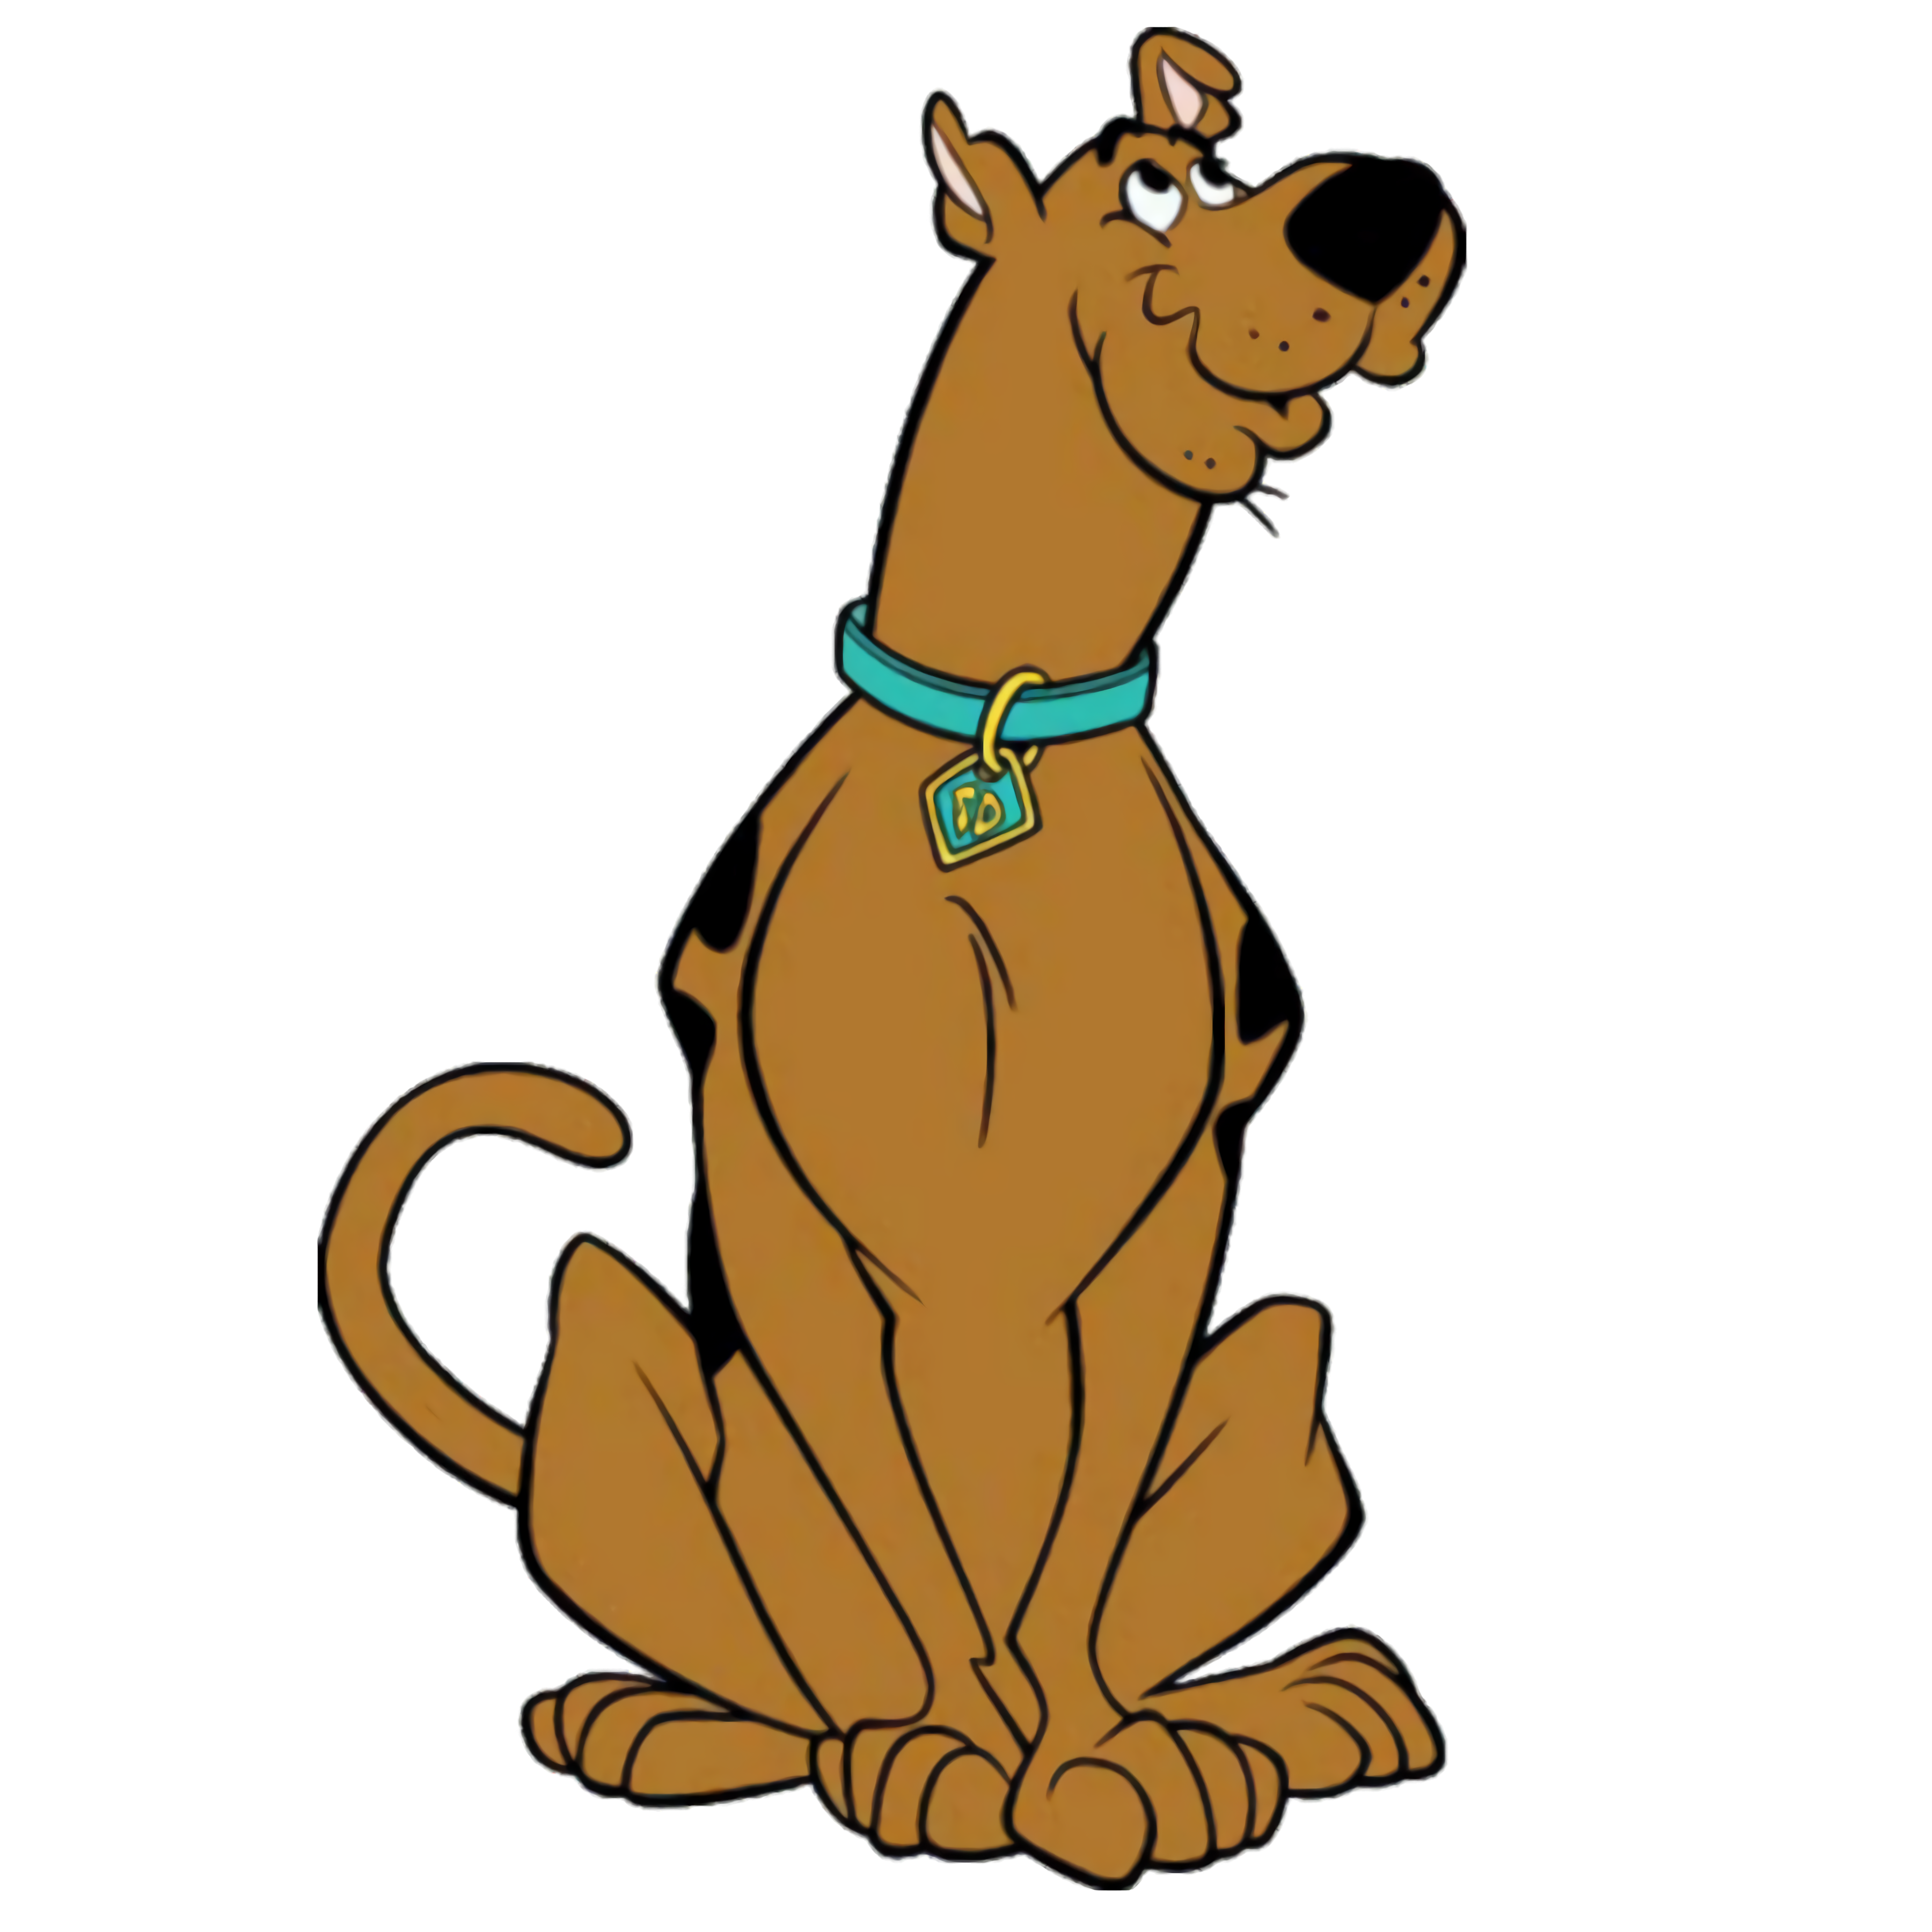 ScoobyDoo hry